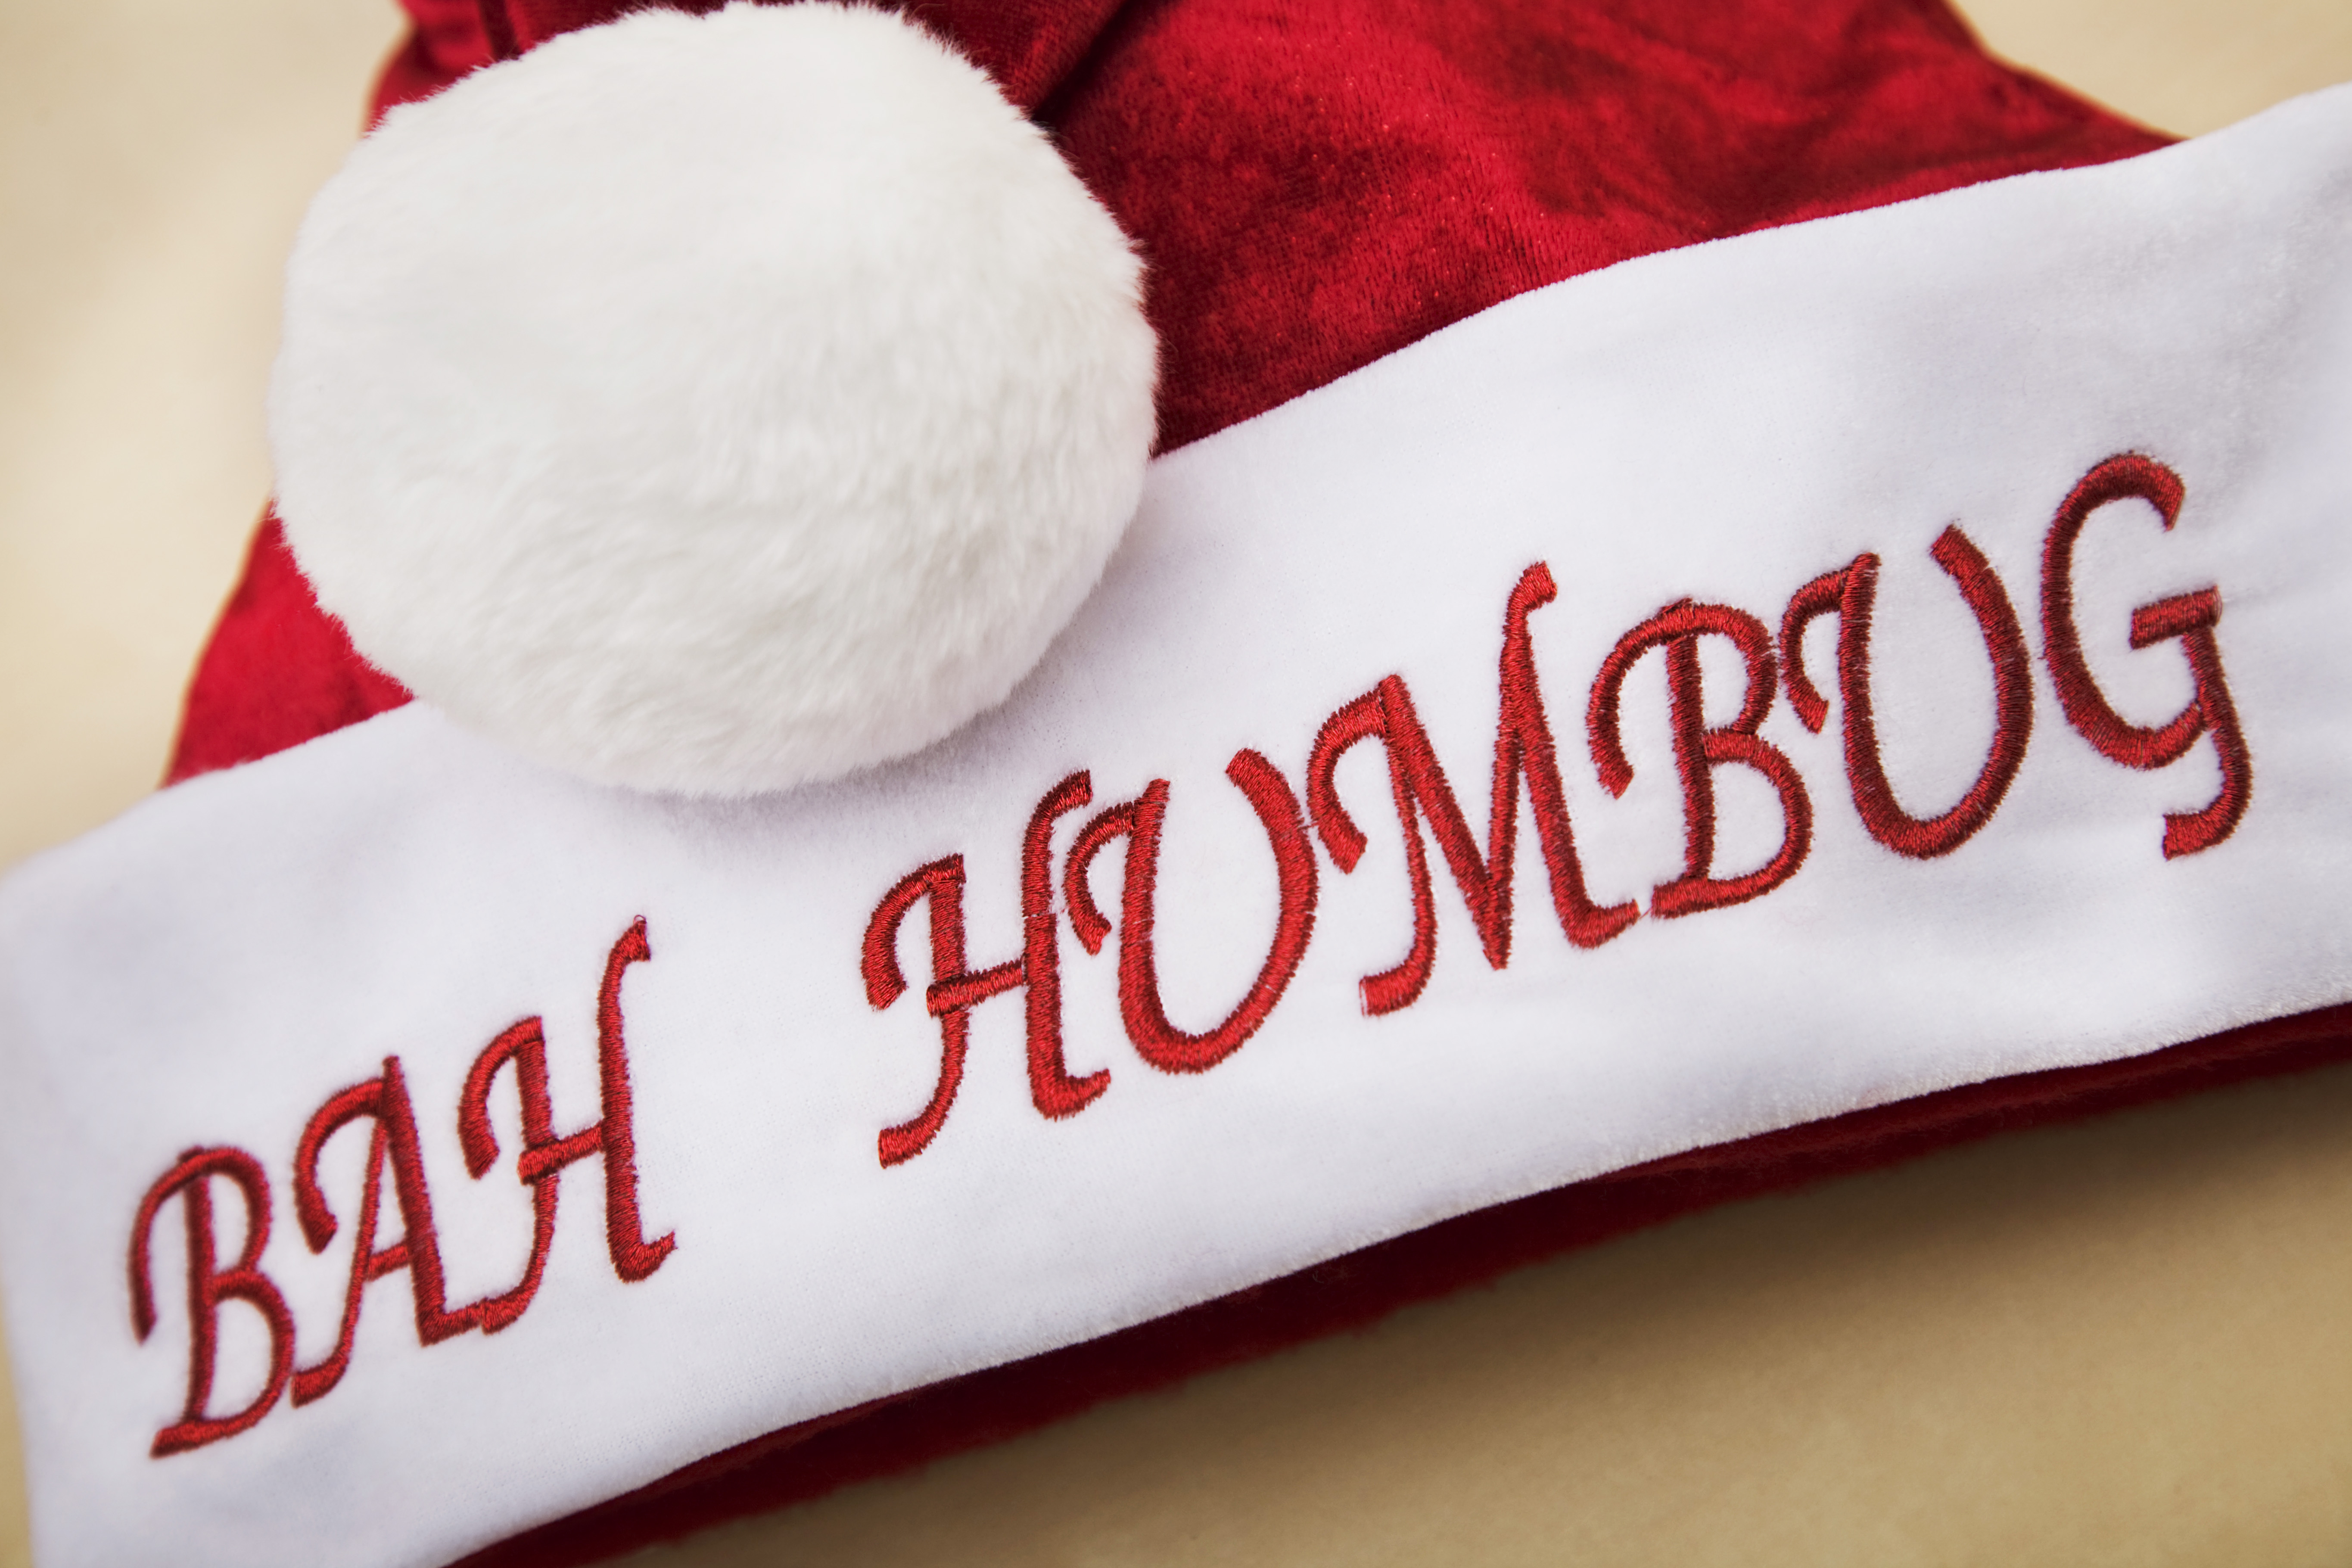 Humbug Day - A day to let out your fustration about the holiday just like Ebenezer Scrooge. #HumbugDay